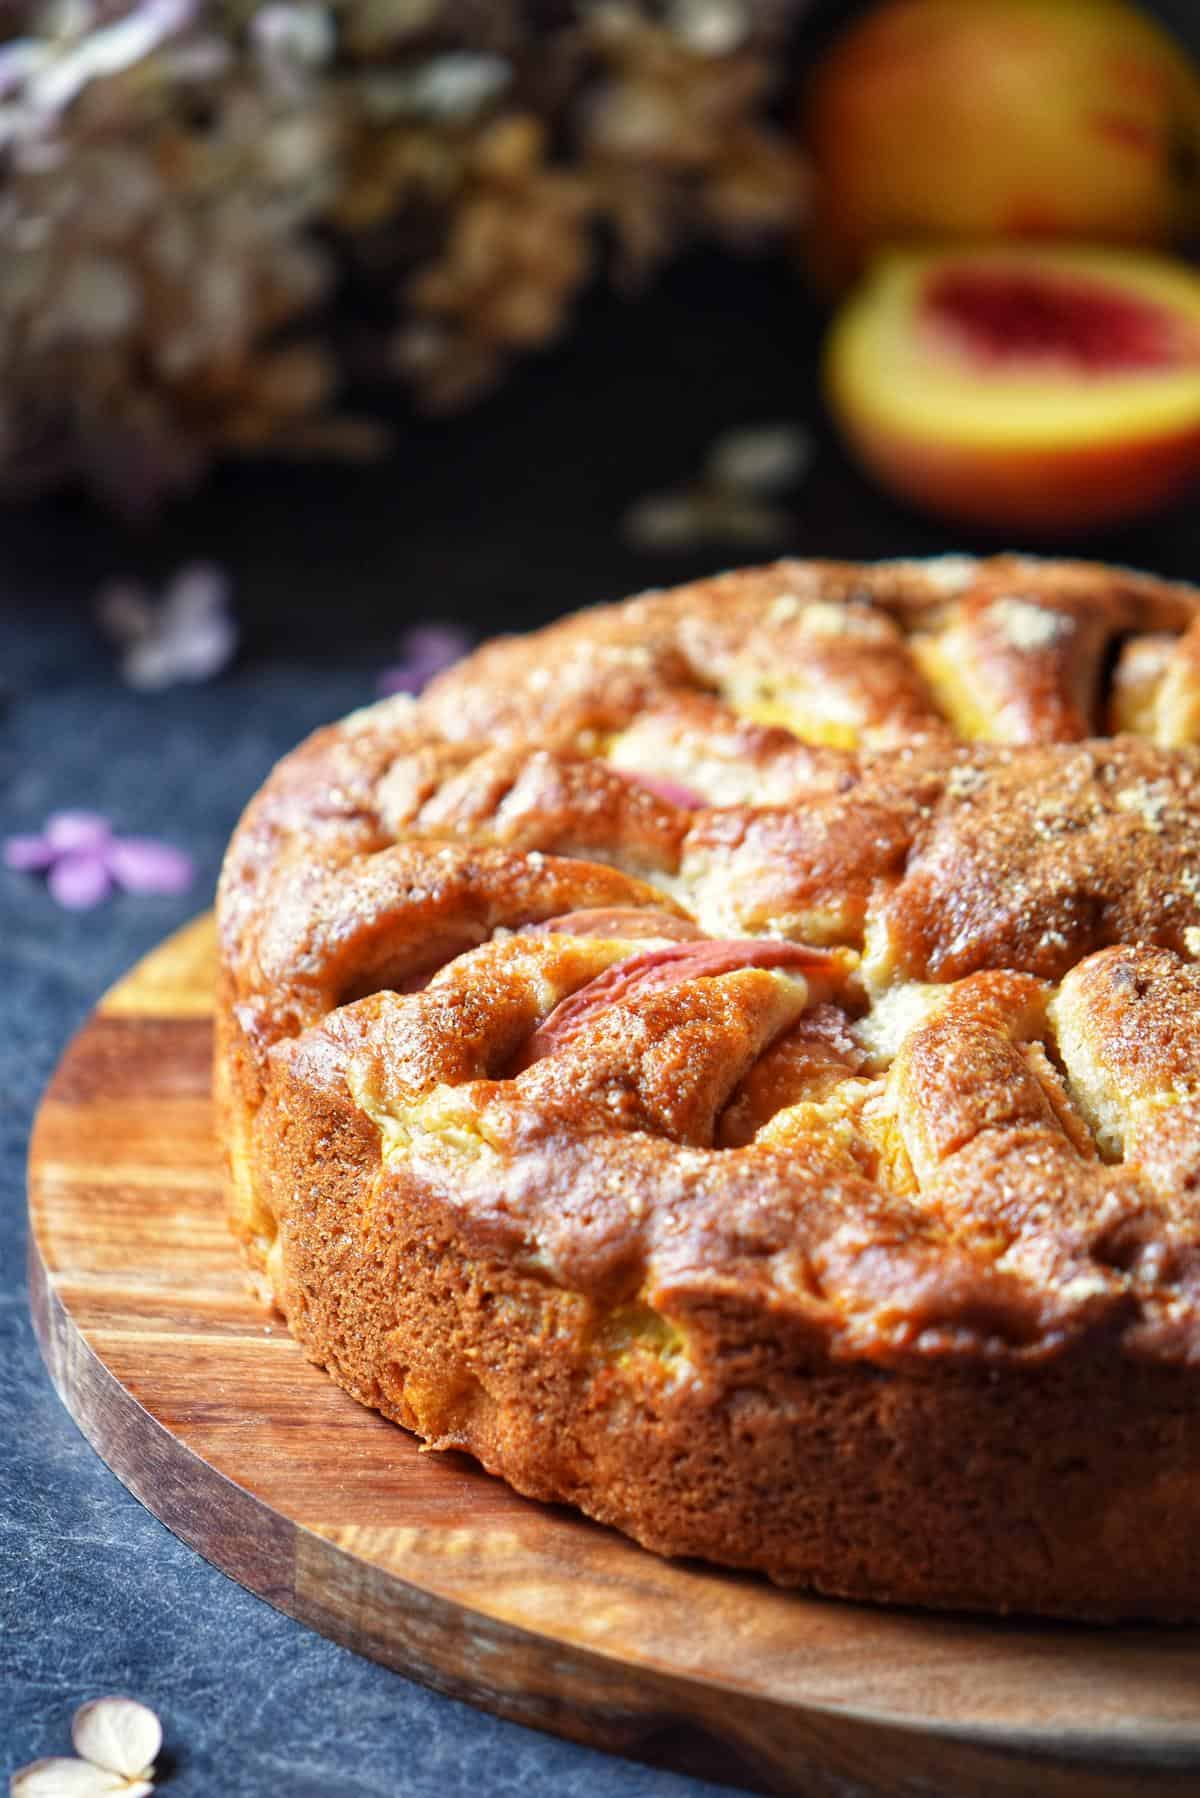 A round peach cake on a wooden board.